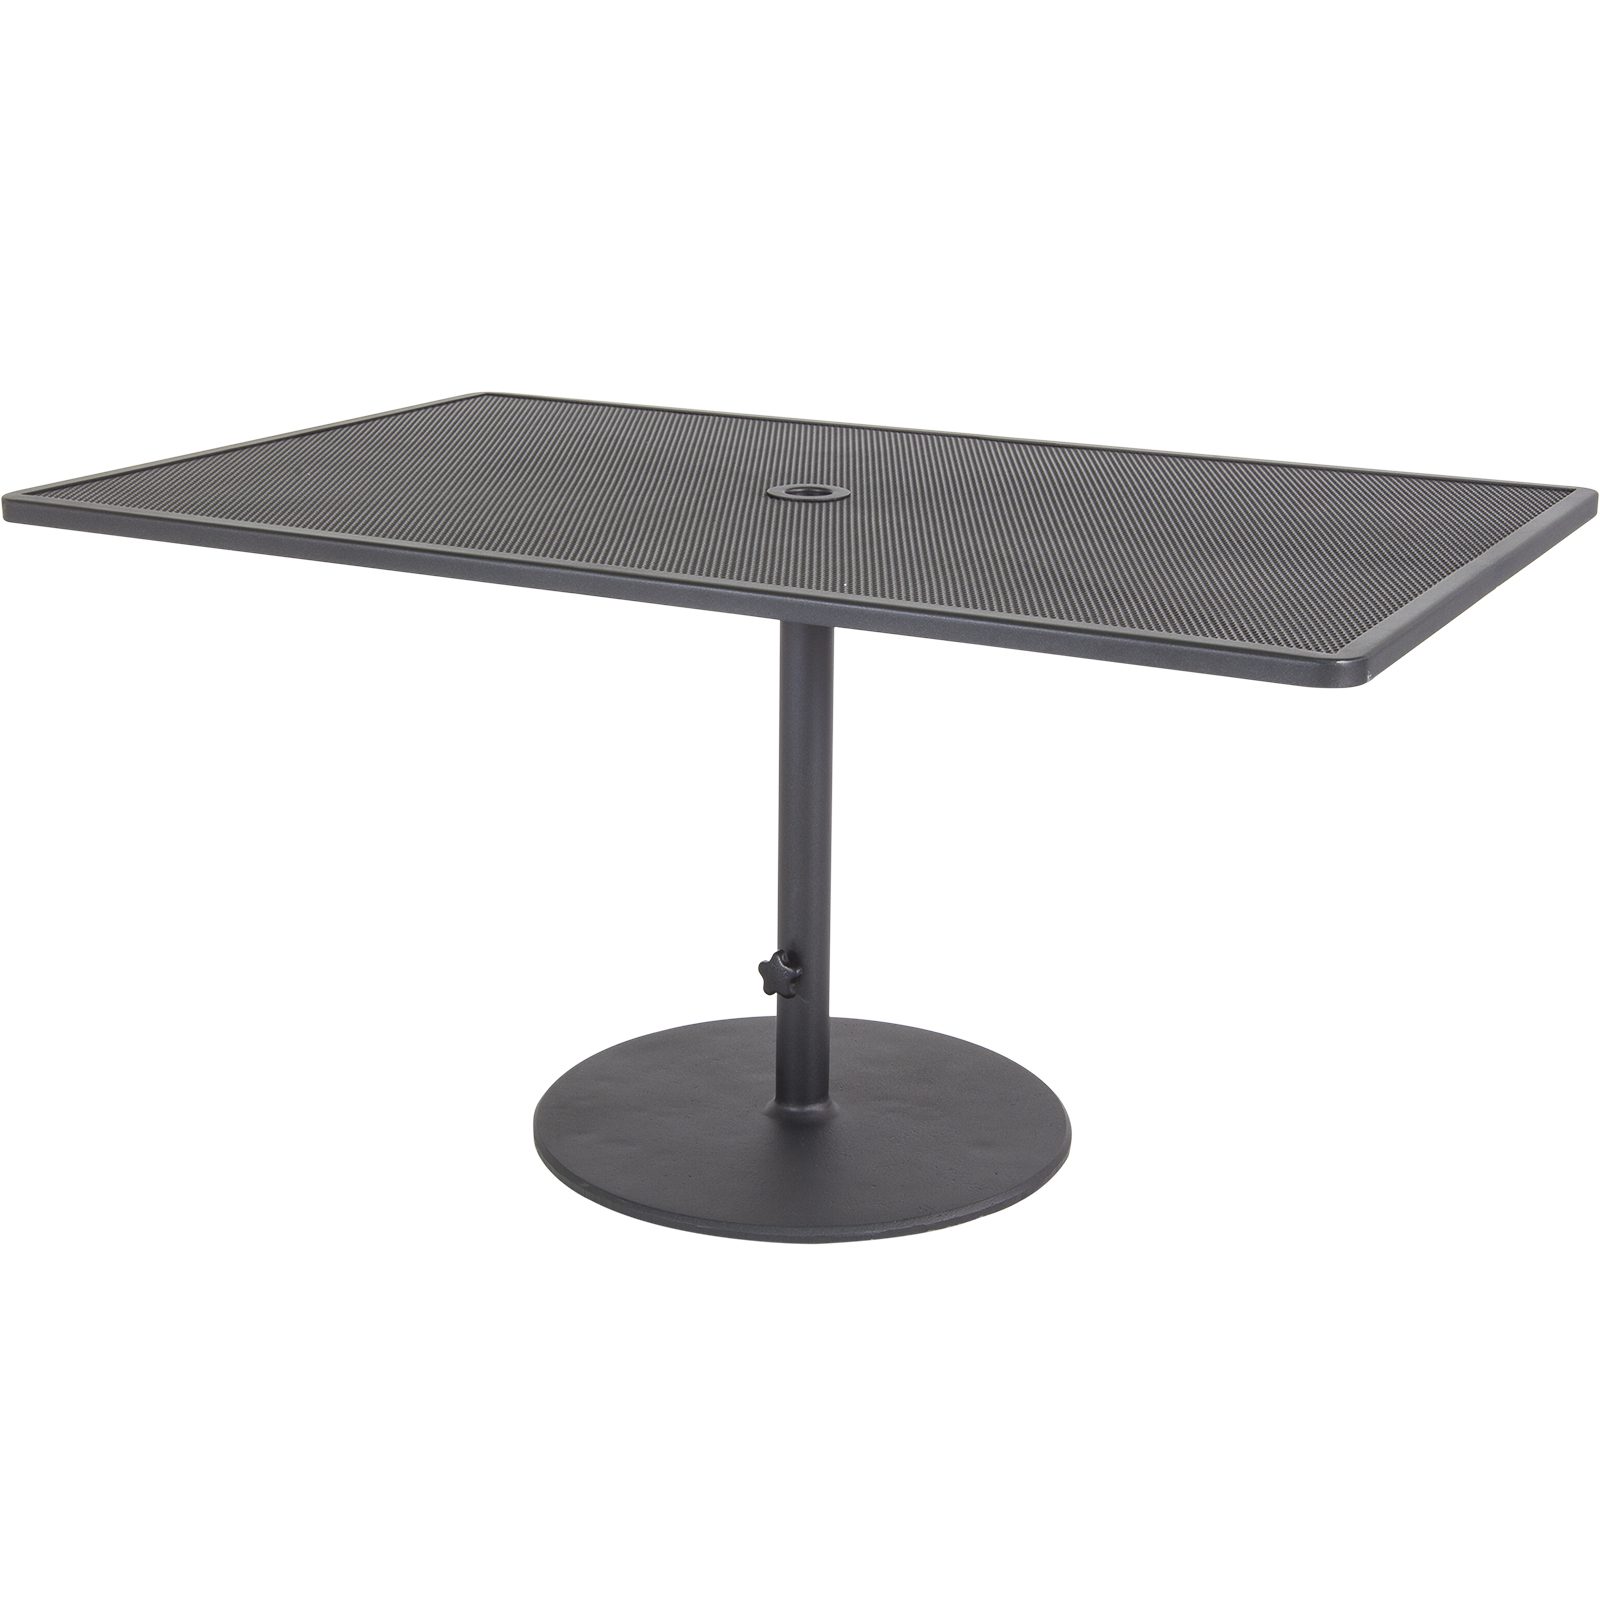 36" x 58" Sq. Pedestal Dining Table - Fully Welded Tables - Pedestal Iron Tables 107